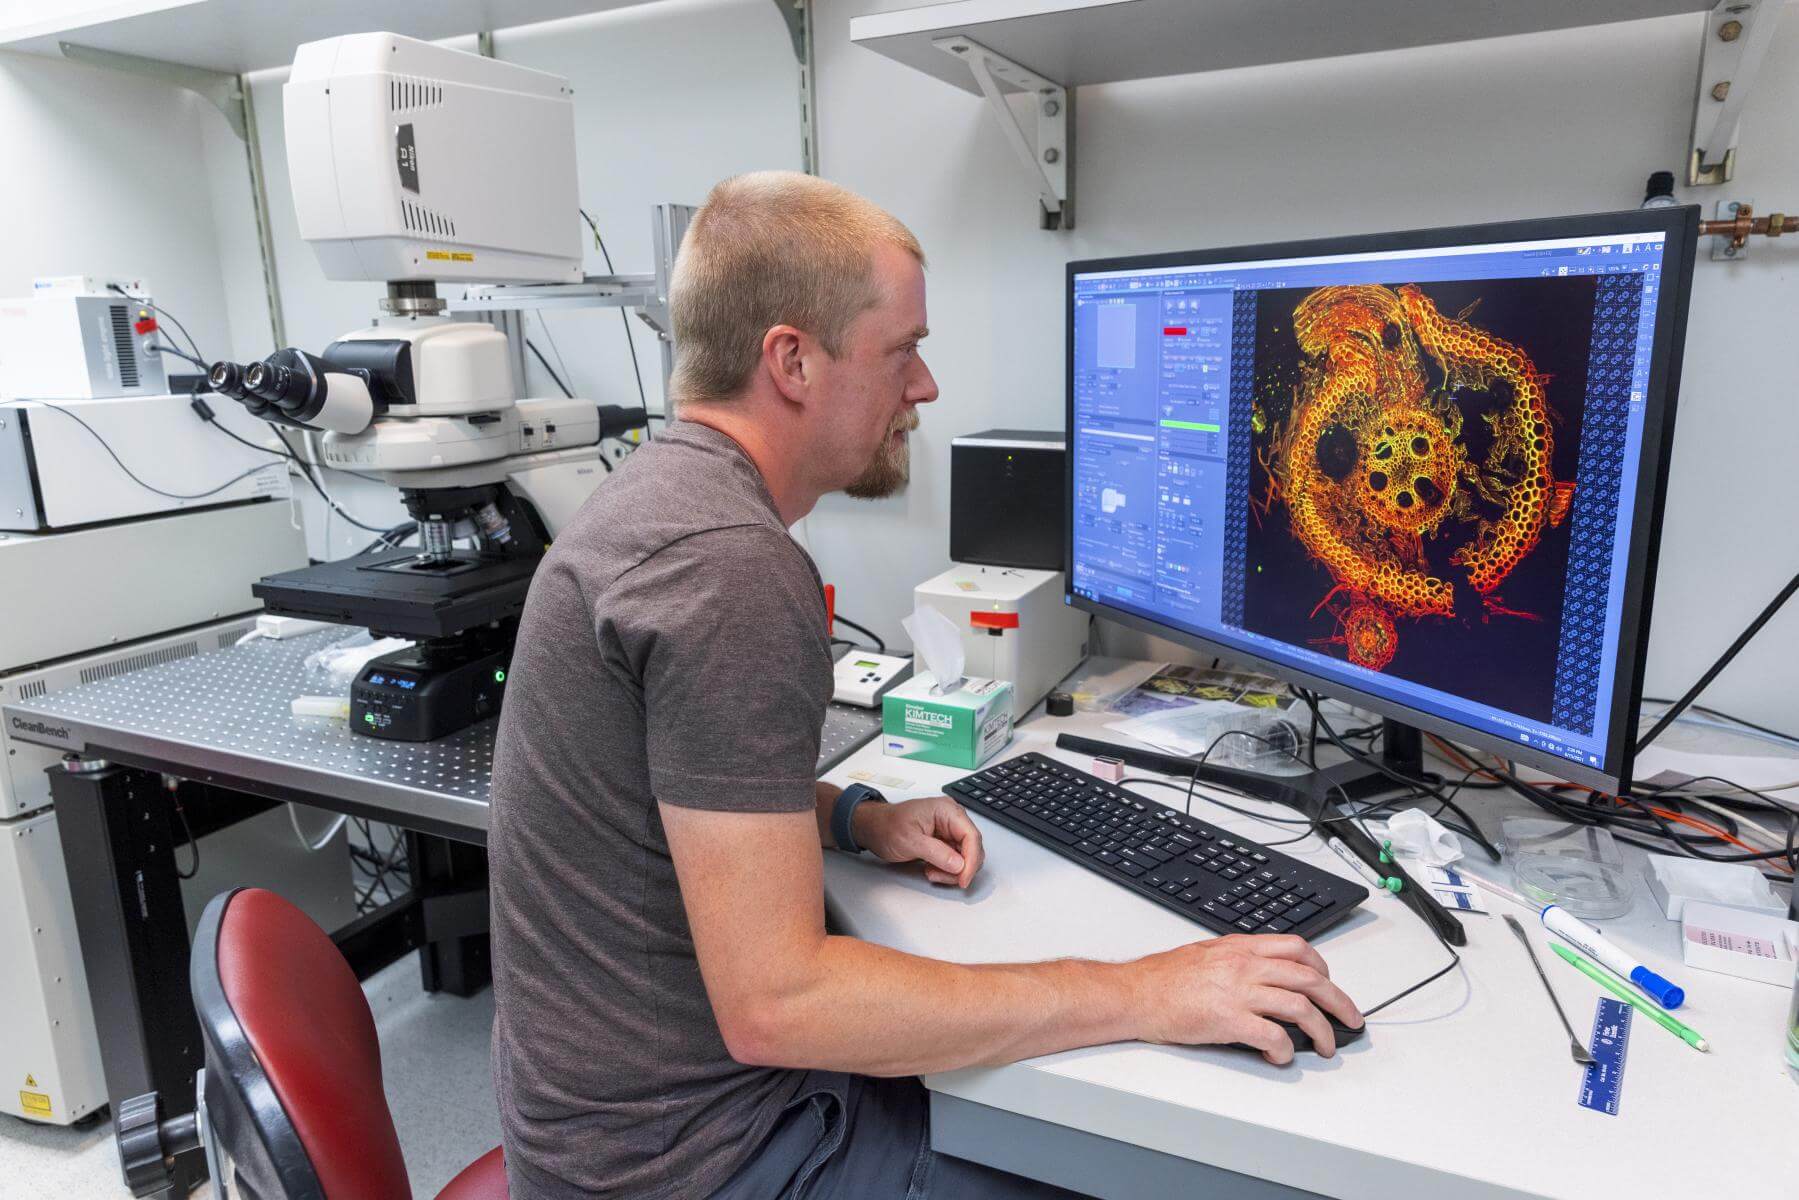 A man sits focusing on an image on a monitor with a microscope over his shoulder.